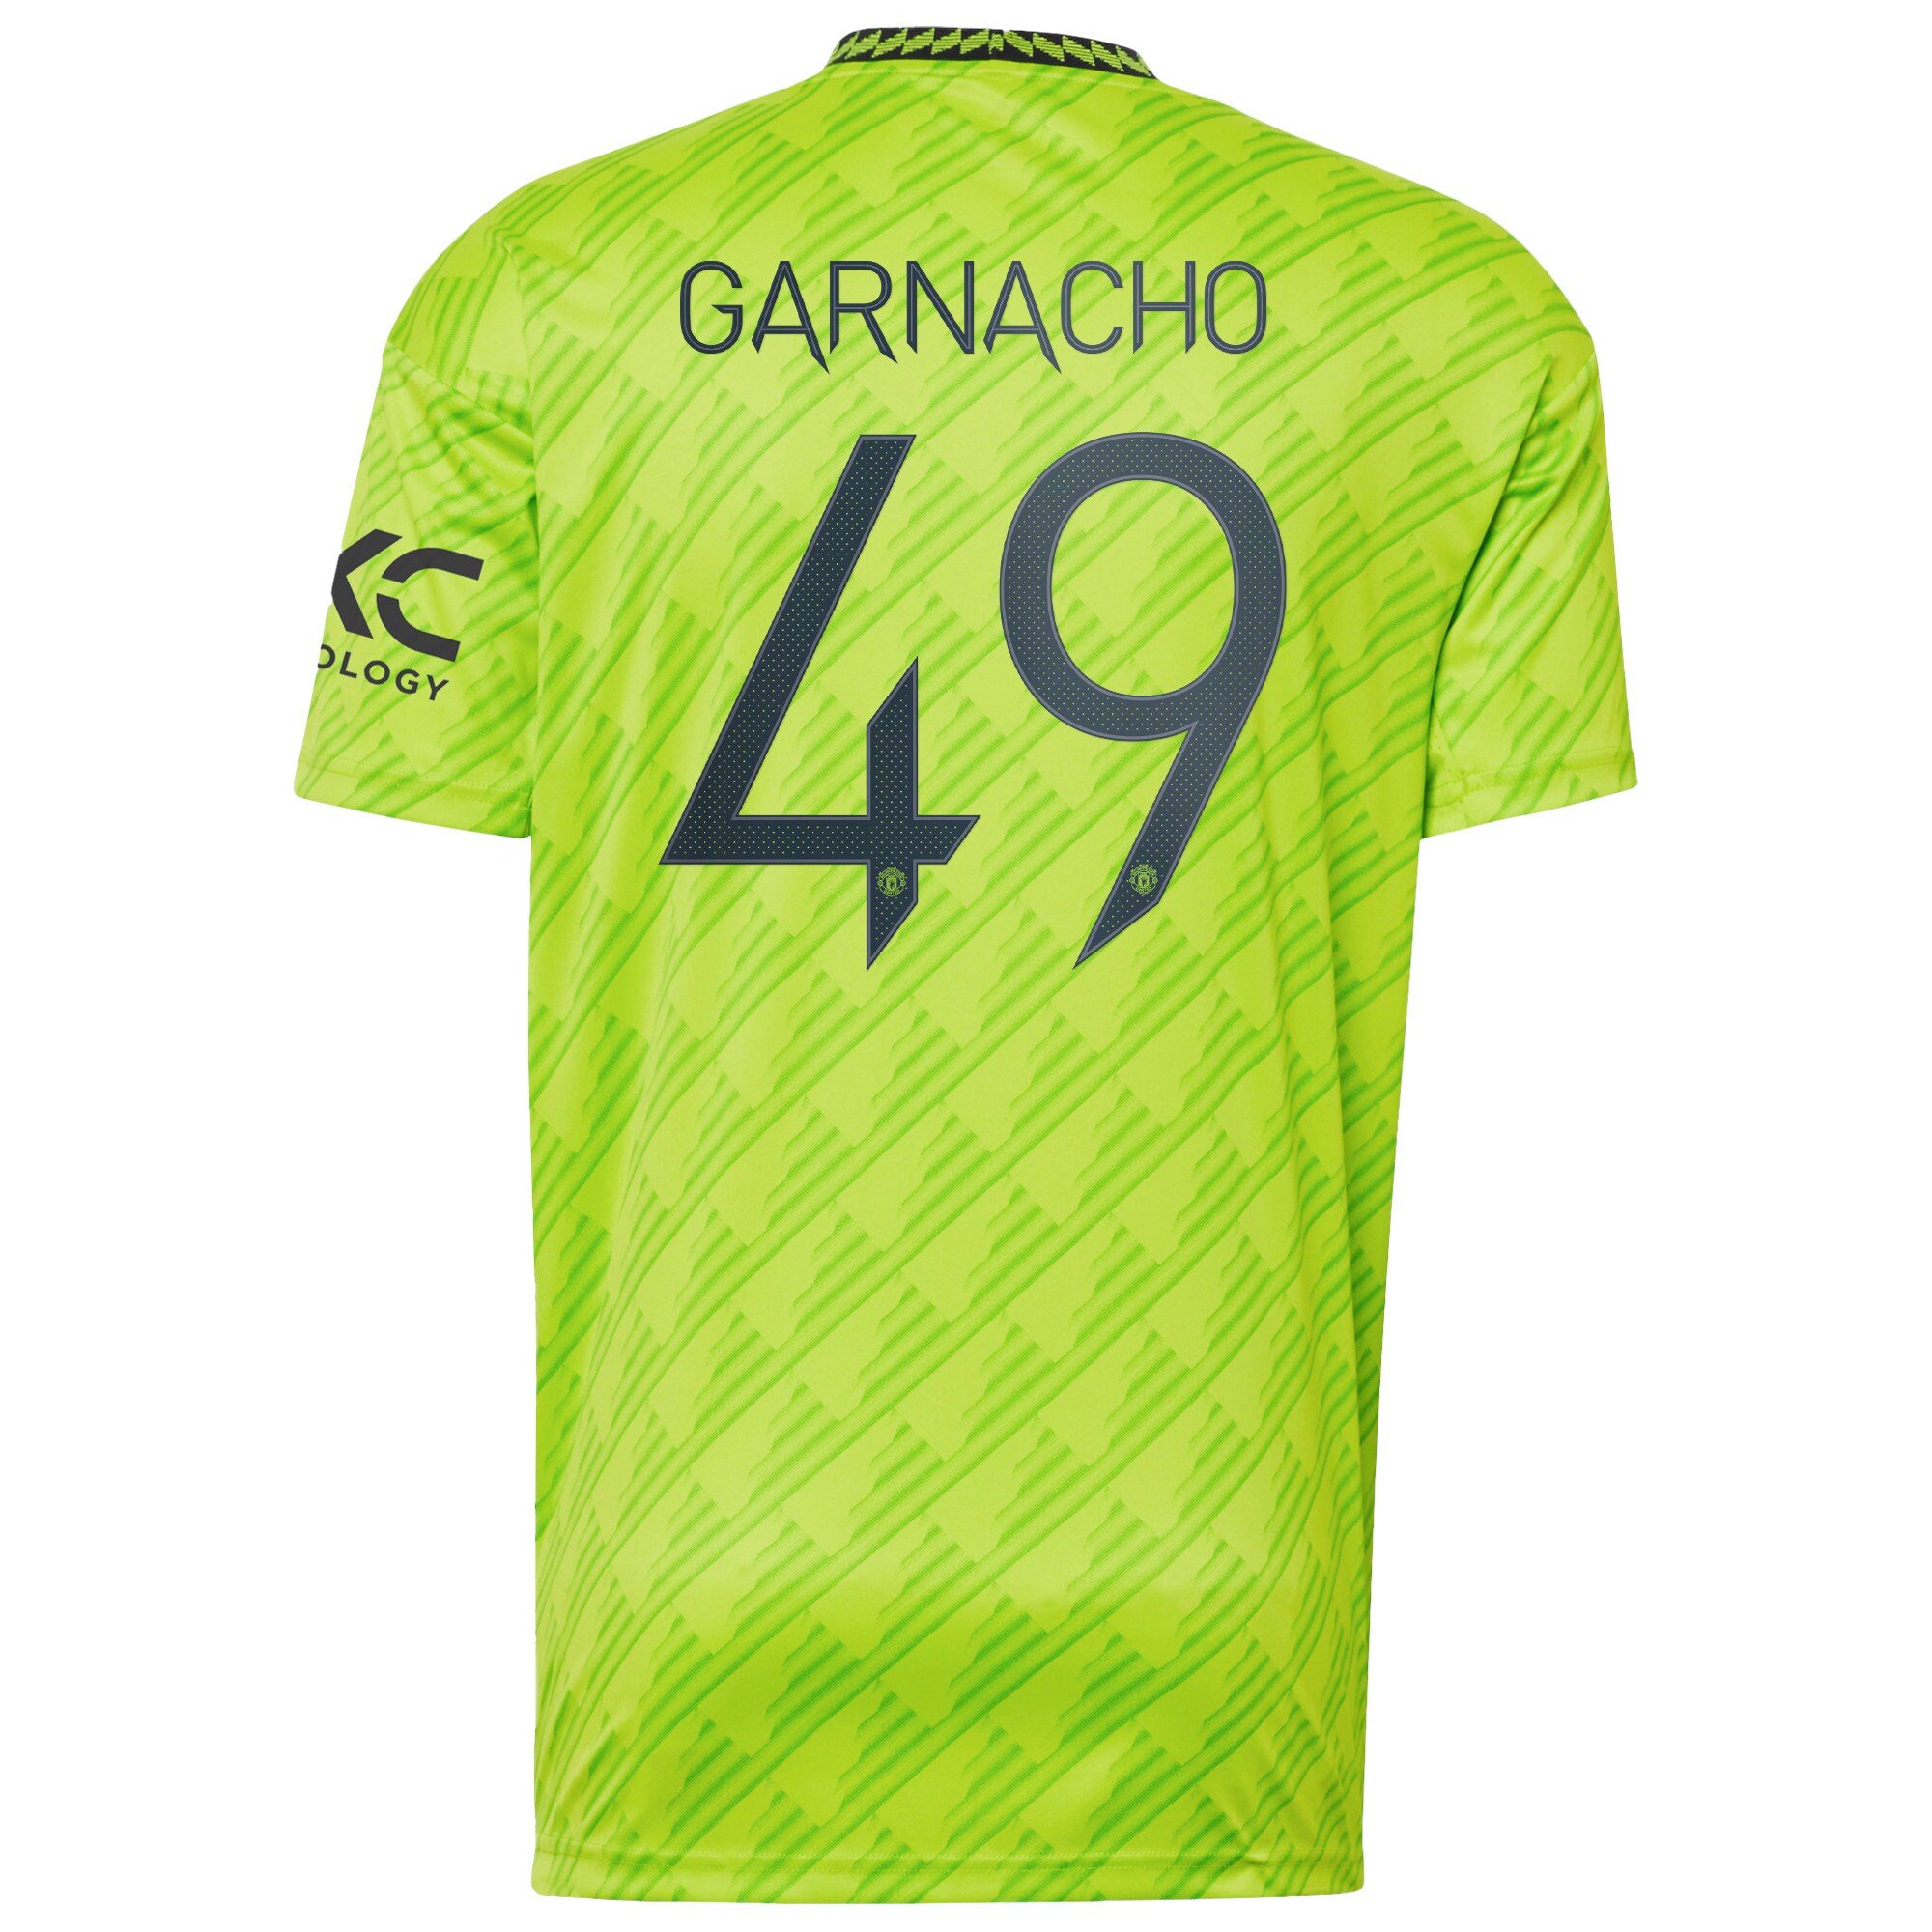 Manchester United Cup Third Shirt 2022-23 with Garnacho 49 printing